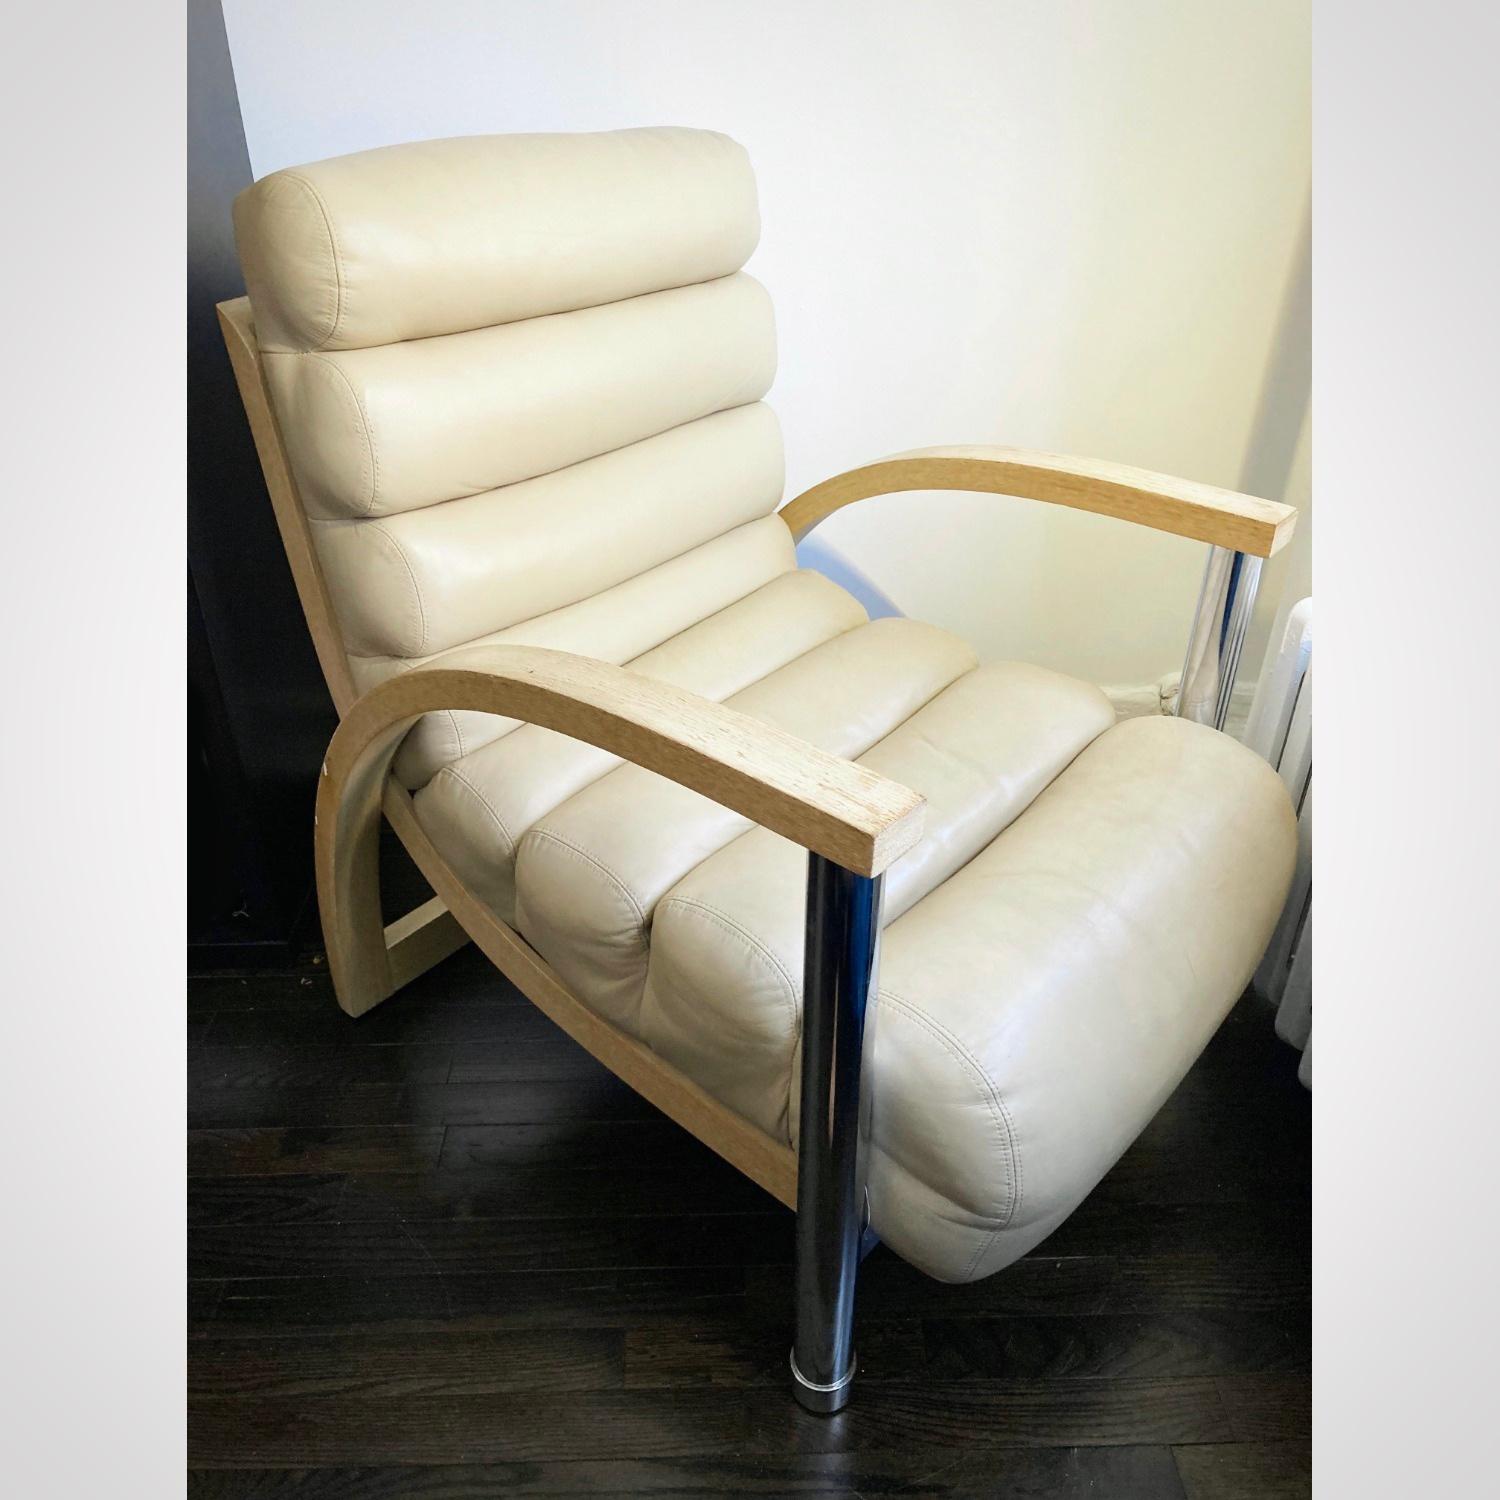 Cerused Jay Spectre Eclipse Leather Lounge Chair, Organic Modern Century Club Chair 1980